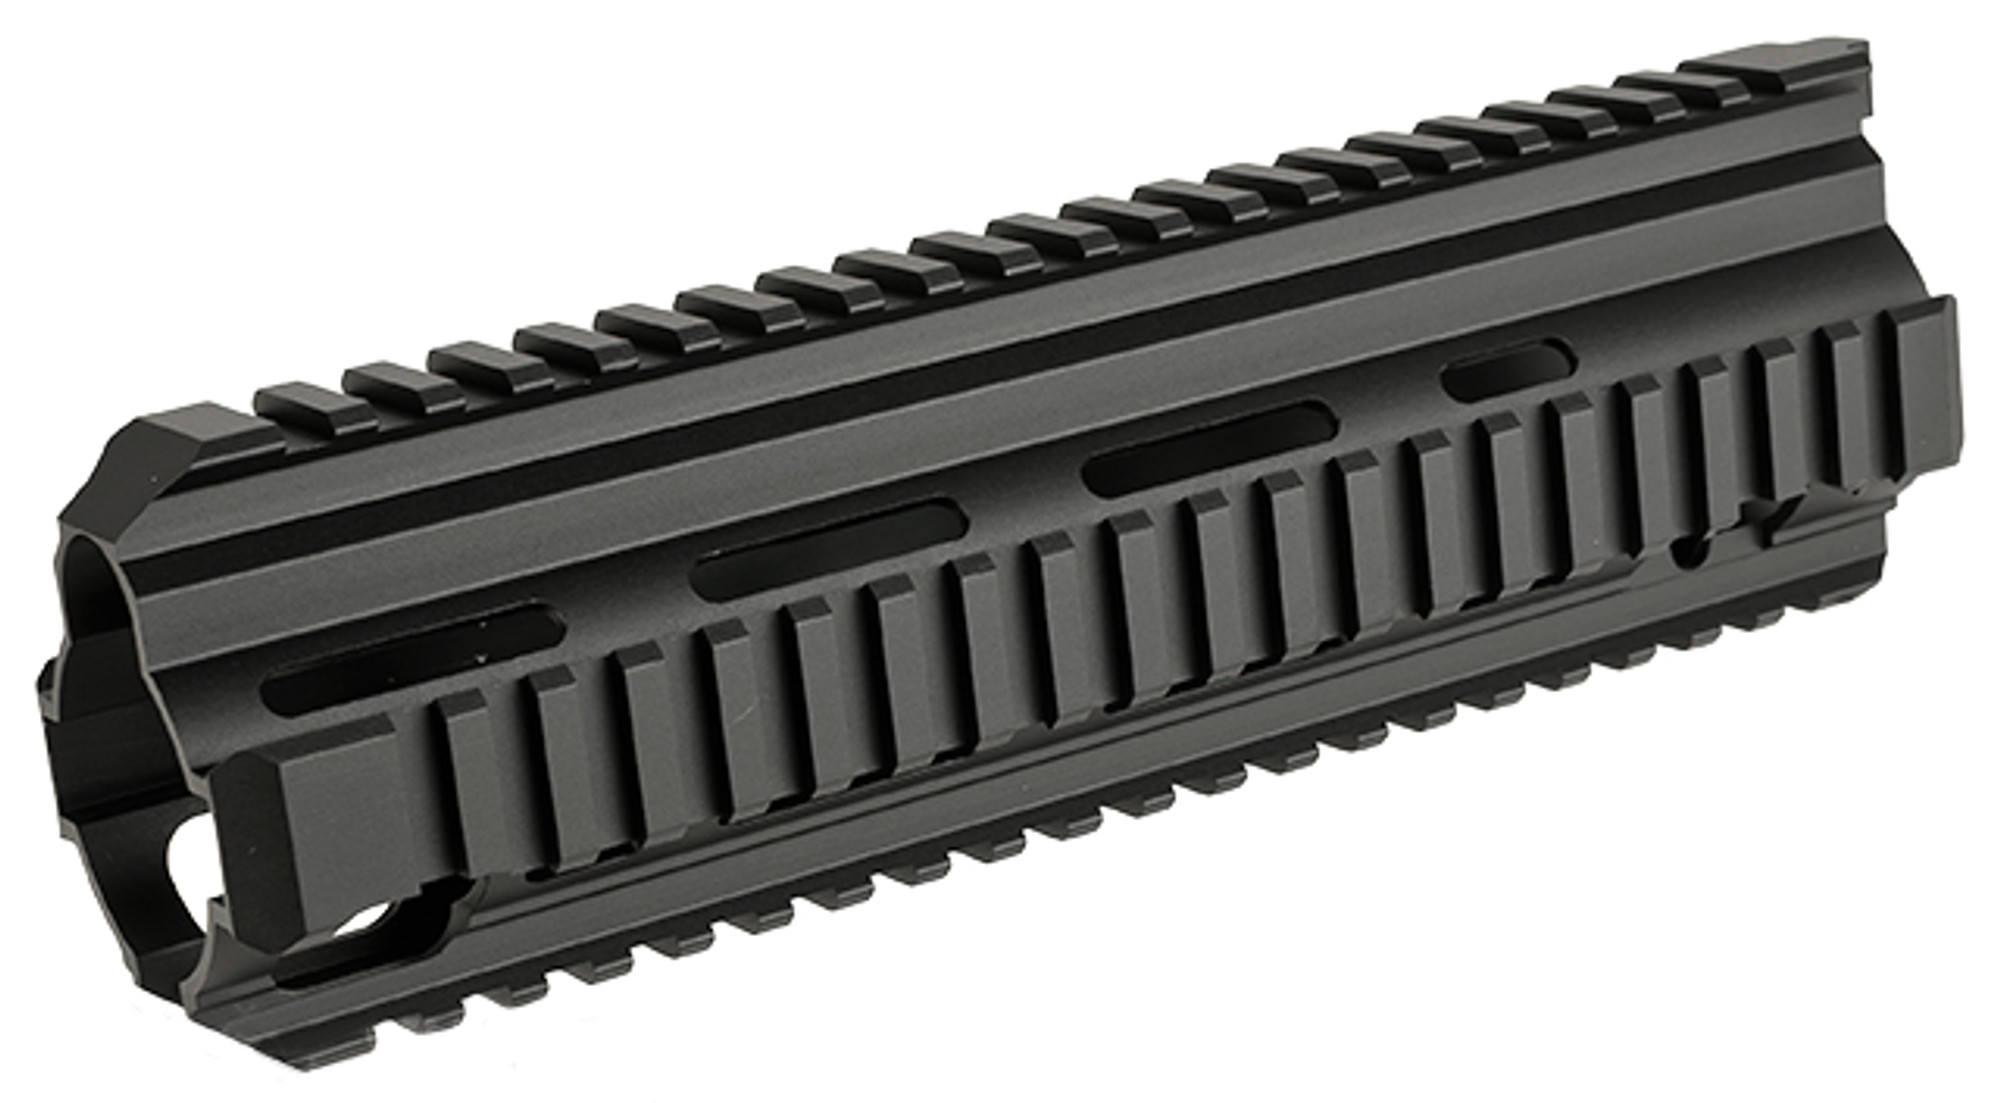 WE-Tech 9" Rail System for WE 888 / SOL Airsoft GBB Rifles